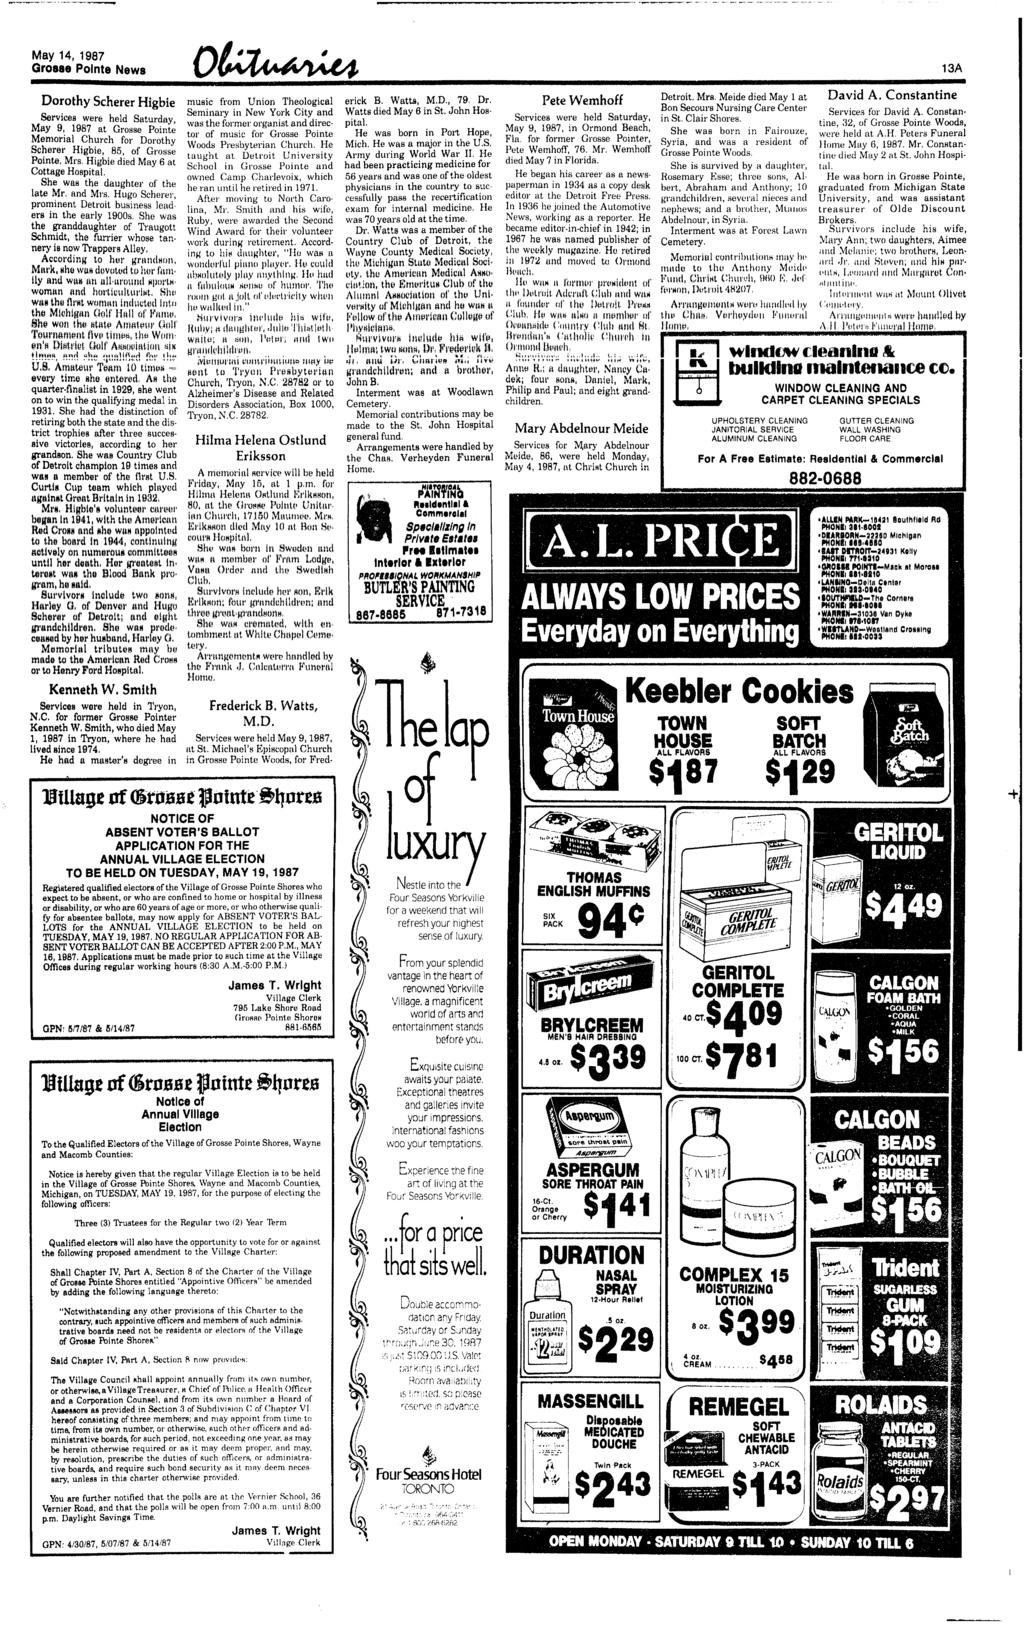 21 Spectacular Roseville Vases Prices 2024 free download roseville vases prices of press role in harts withdrawal could affect future candidates pdf regarding may 14 1987 o 13a dorothy scherer higbie services were held saturday may 9